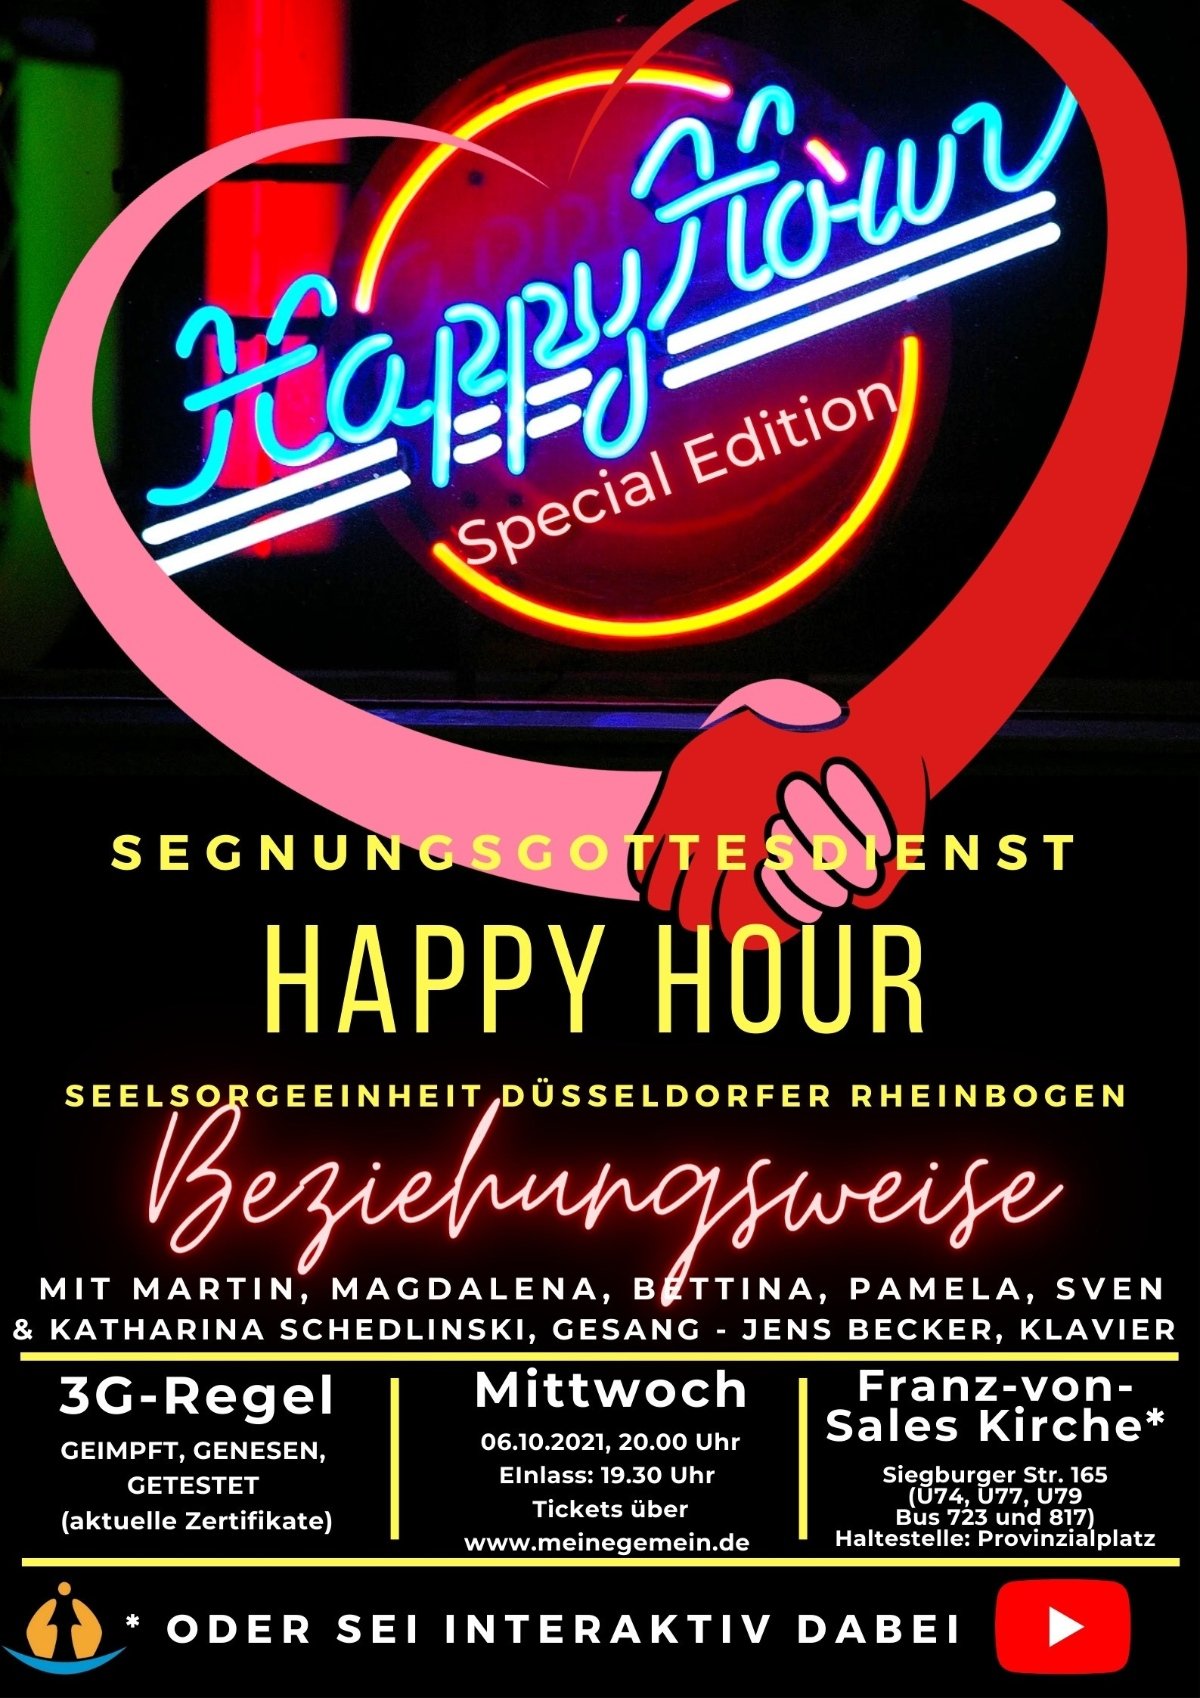 Happy Hour Special Edition Beziehungsweise 6.10.2021